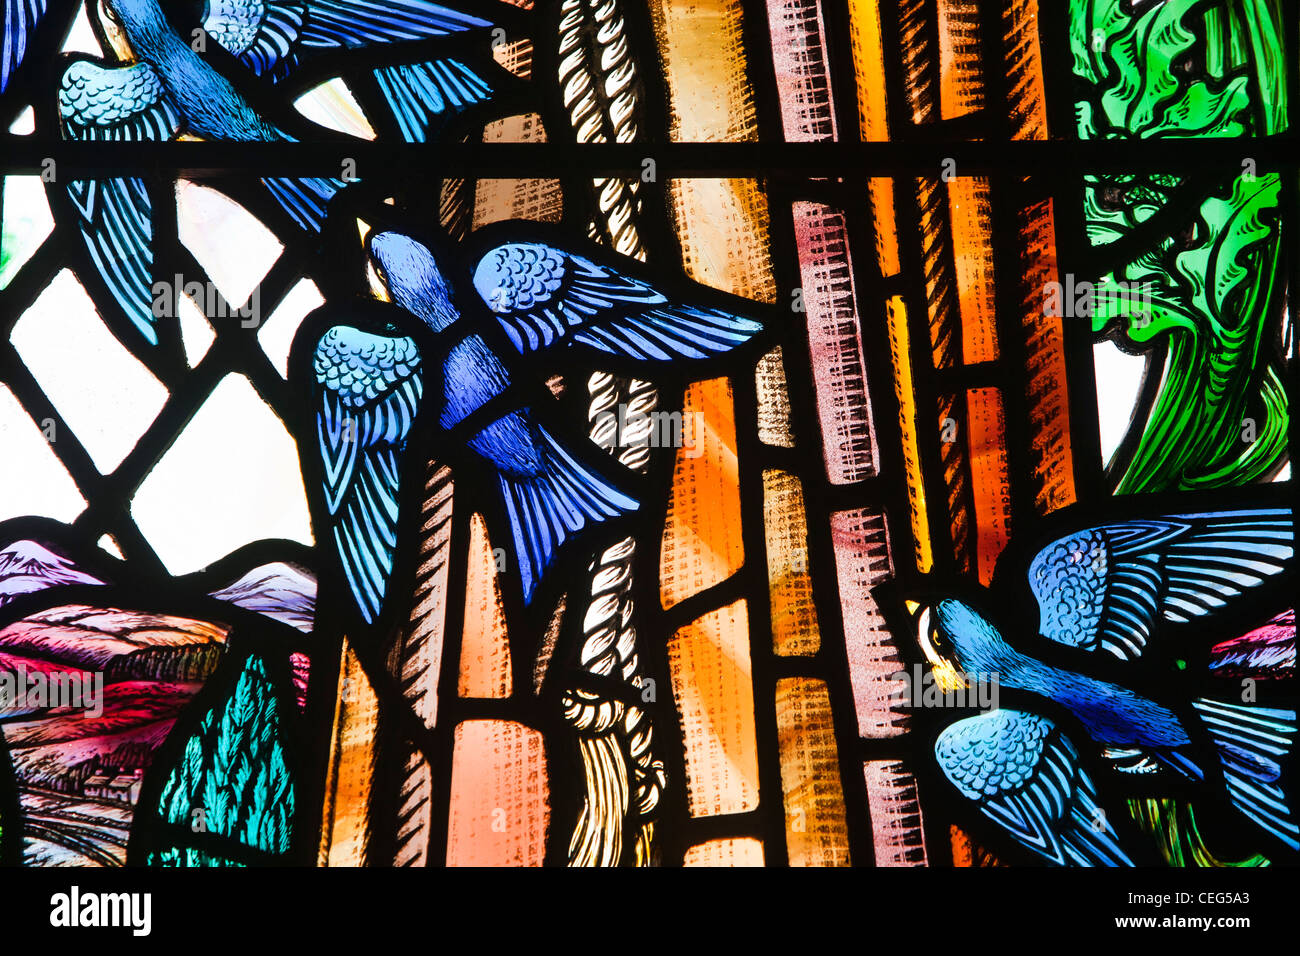 Swallows in a stained glass window in Chapel Stile church, Langdale, Lake District, UK. Stock Photo